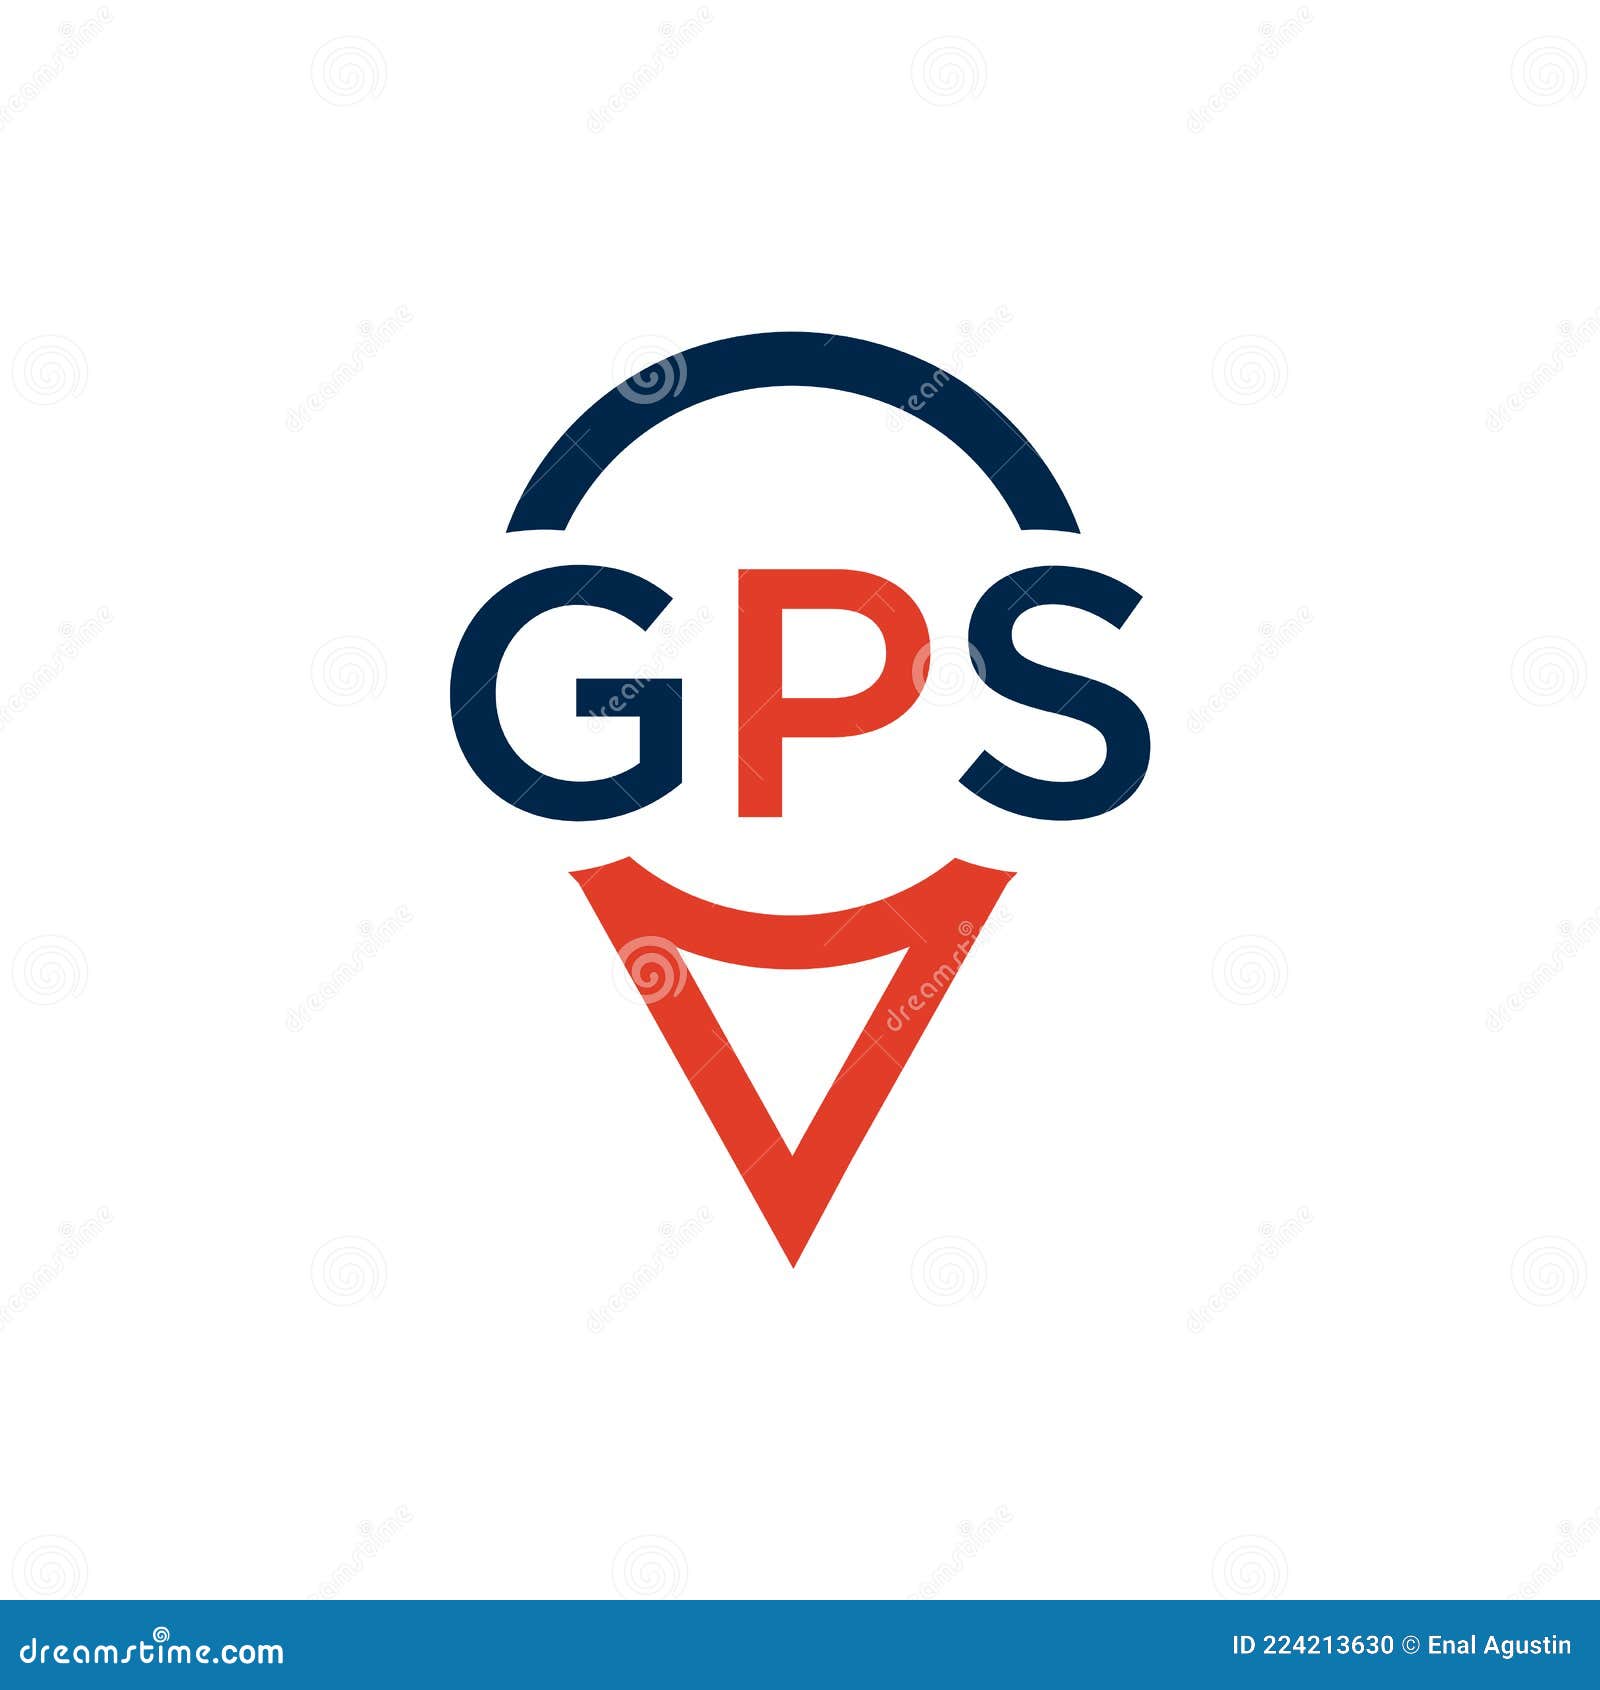 Professional, Serious, Gps Logo Design for GPS Fleet Control (this text can  be under or next to Logo or somehow incorporated into it) by Unicgraphs |  Design #4977463